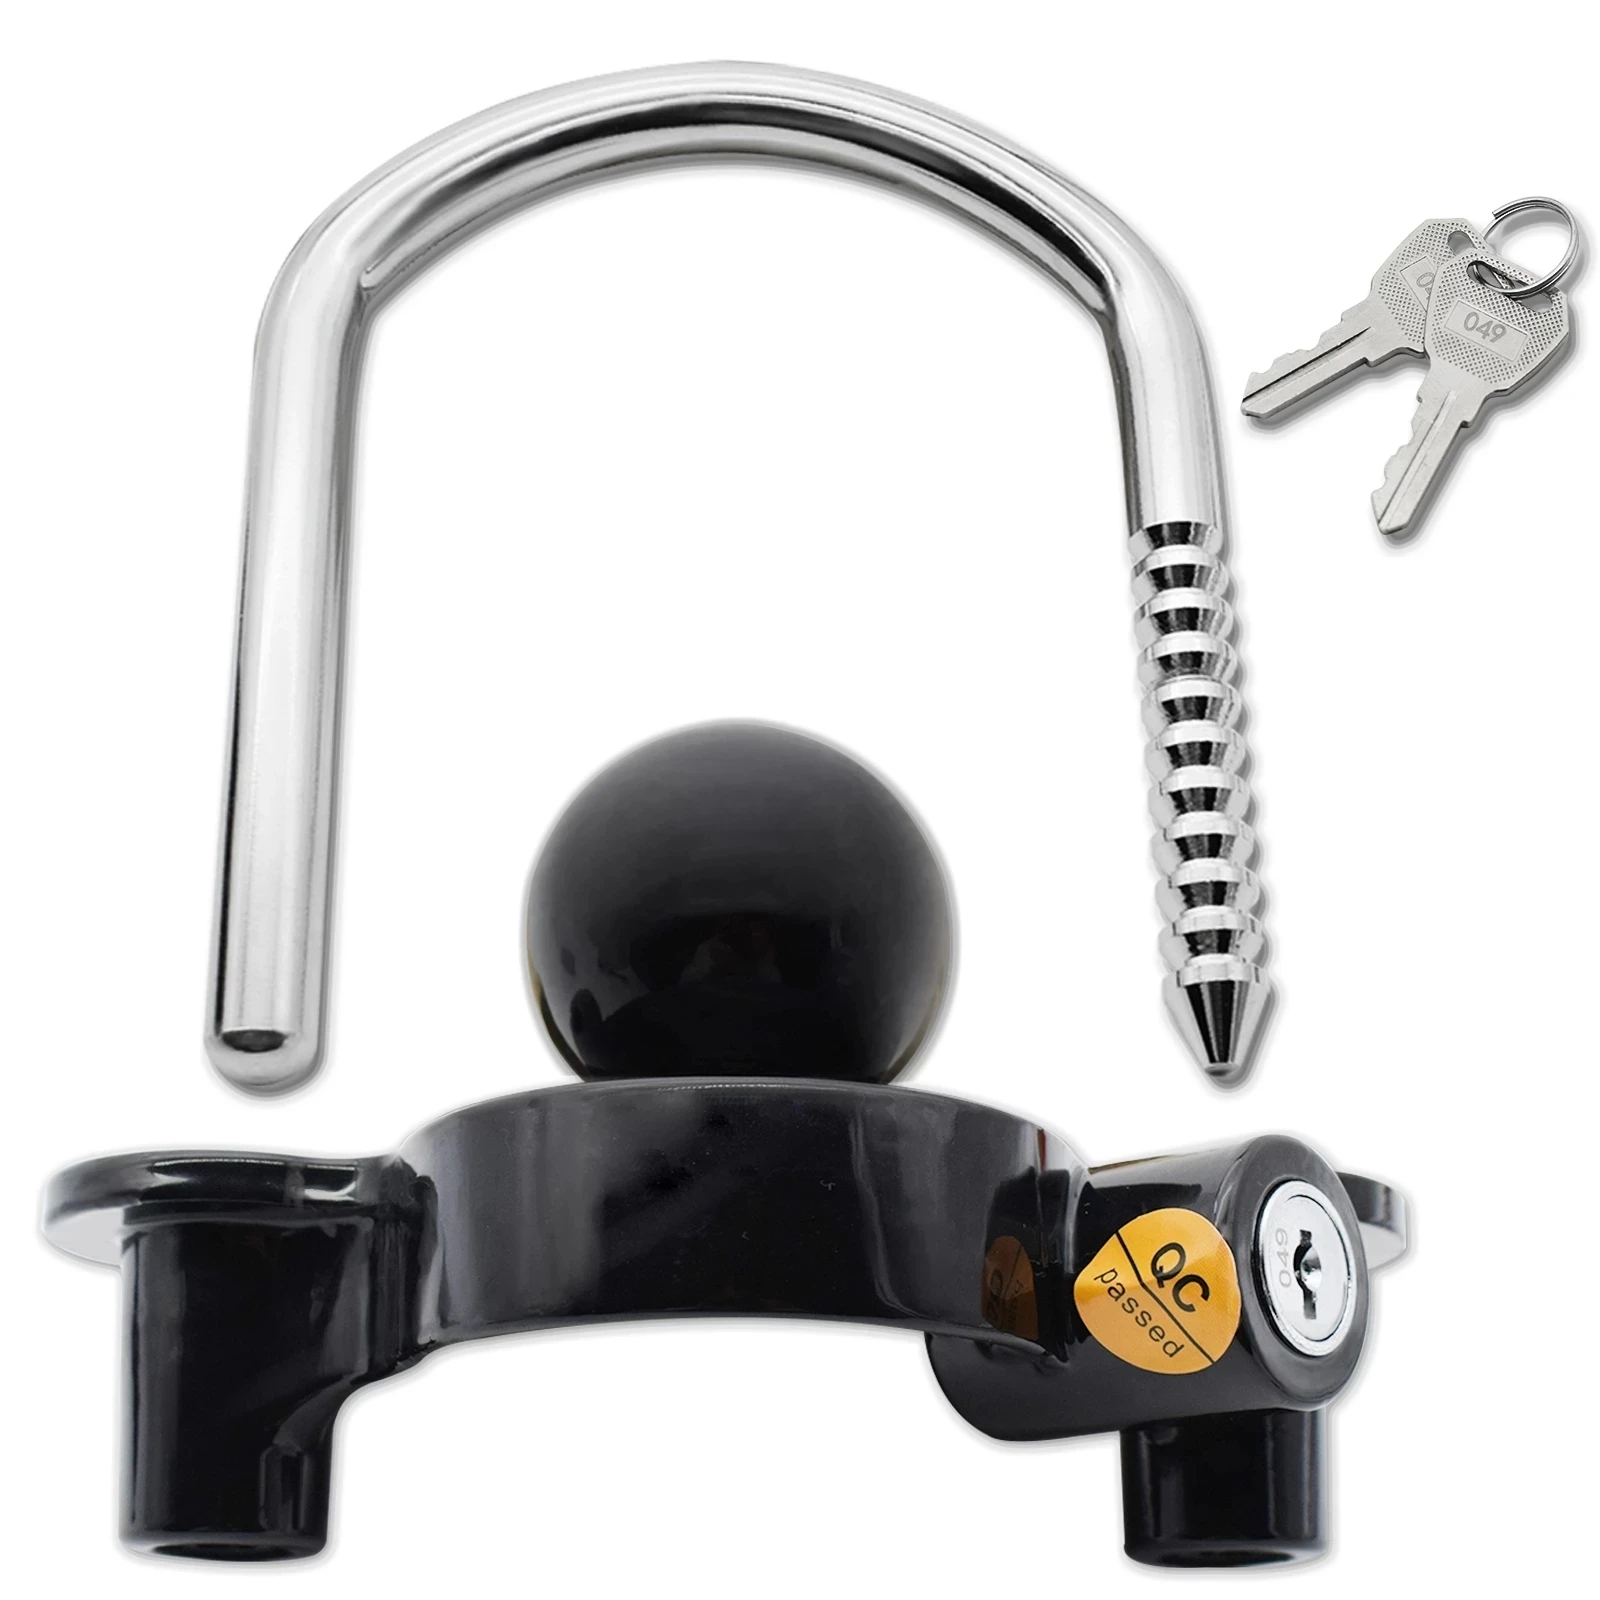 Primary image for Trailer Coupler Hitch Lock - Universal Tow Ball Safe Security Anti-Theft Lock